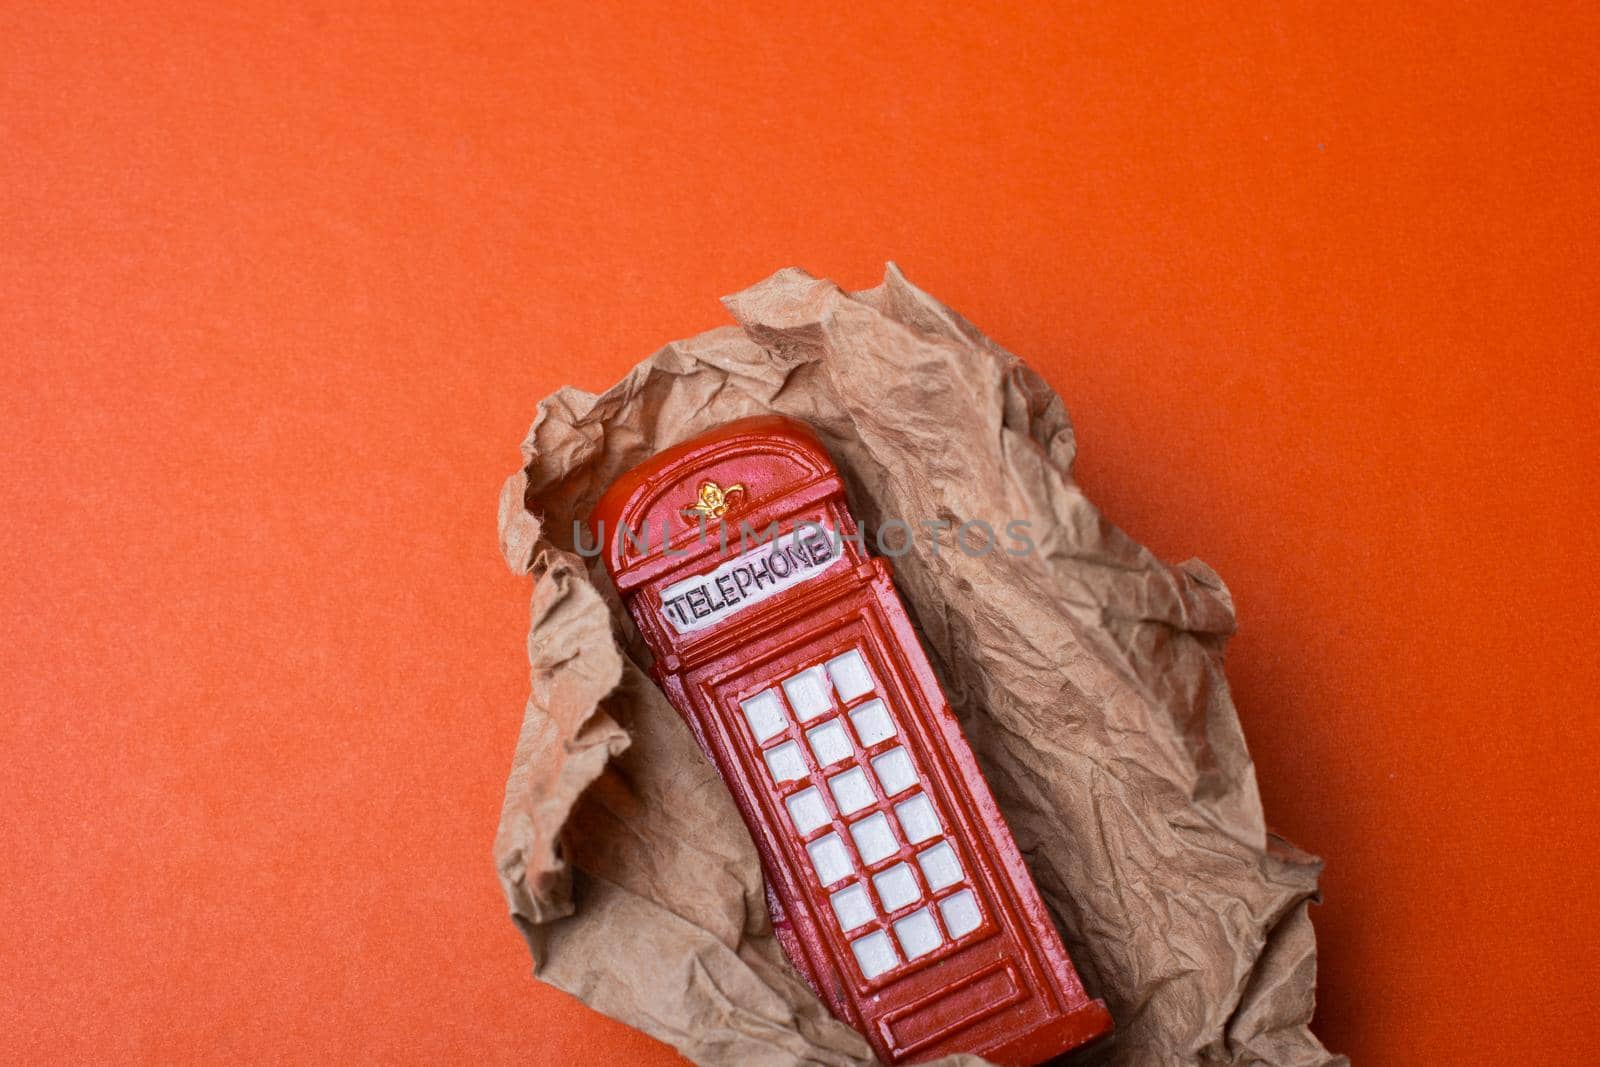 Classical British style Red phone booth of London